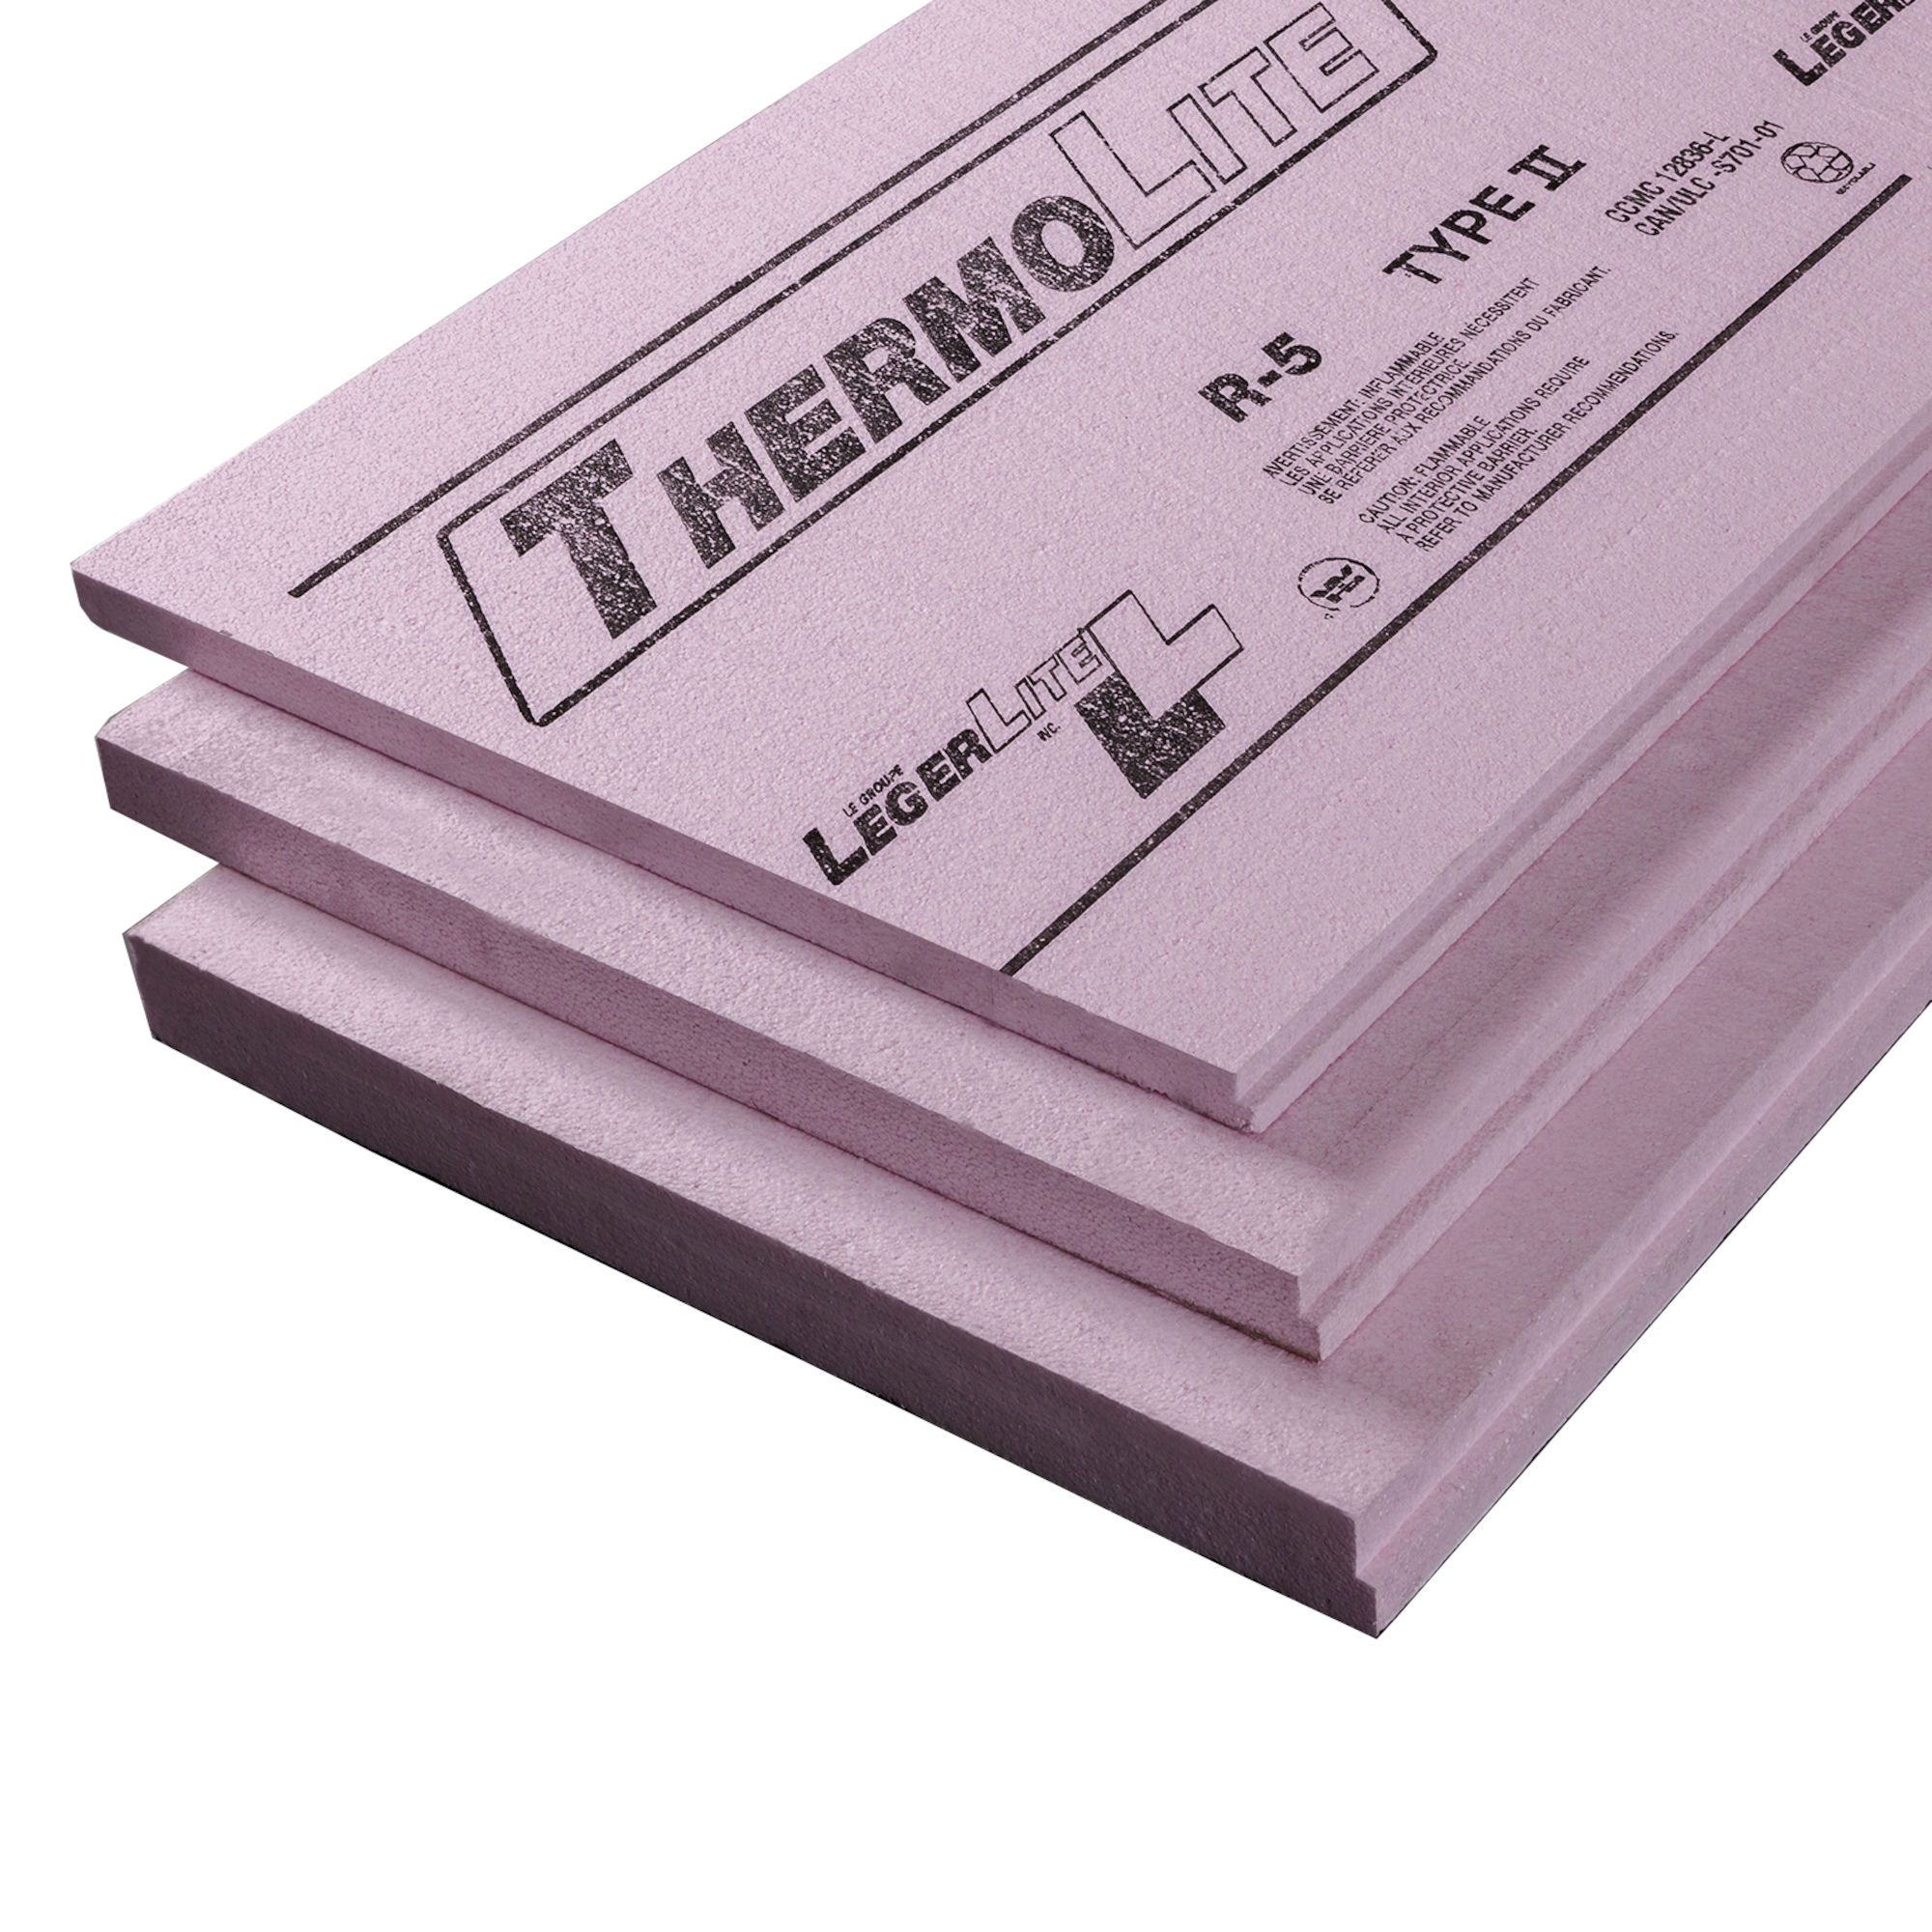 Eps Insulation Sheets